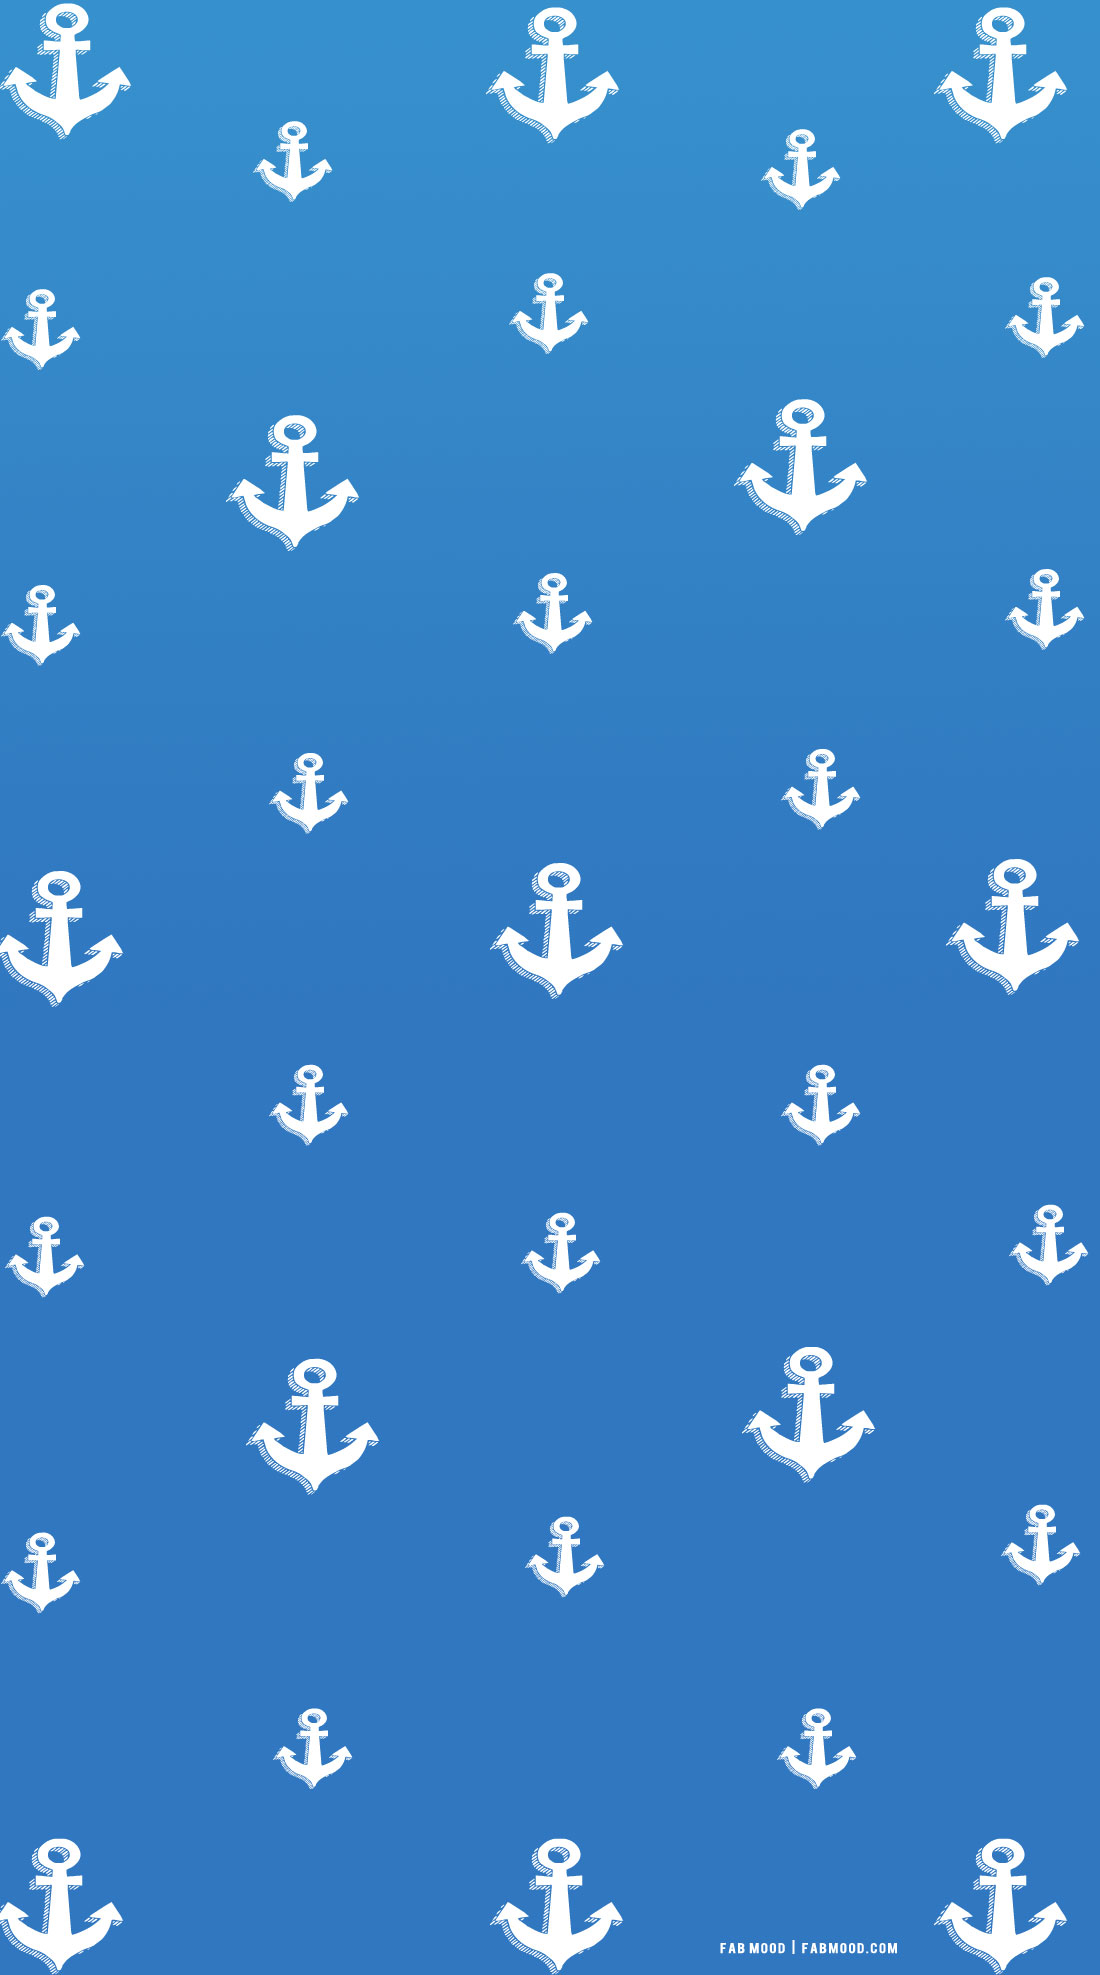 15 Azure Blue Wallpapers For Phone : Ahoy There, Matey!